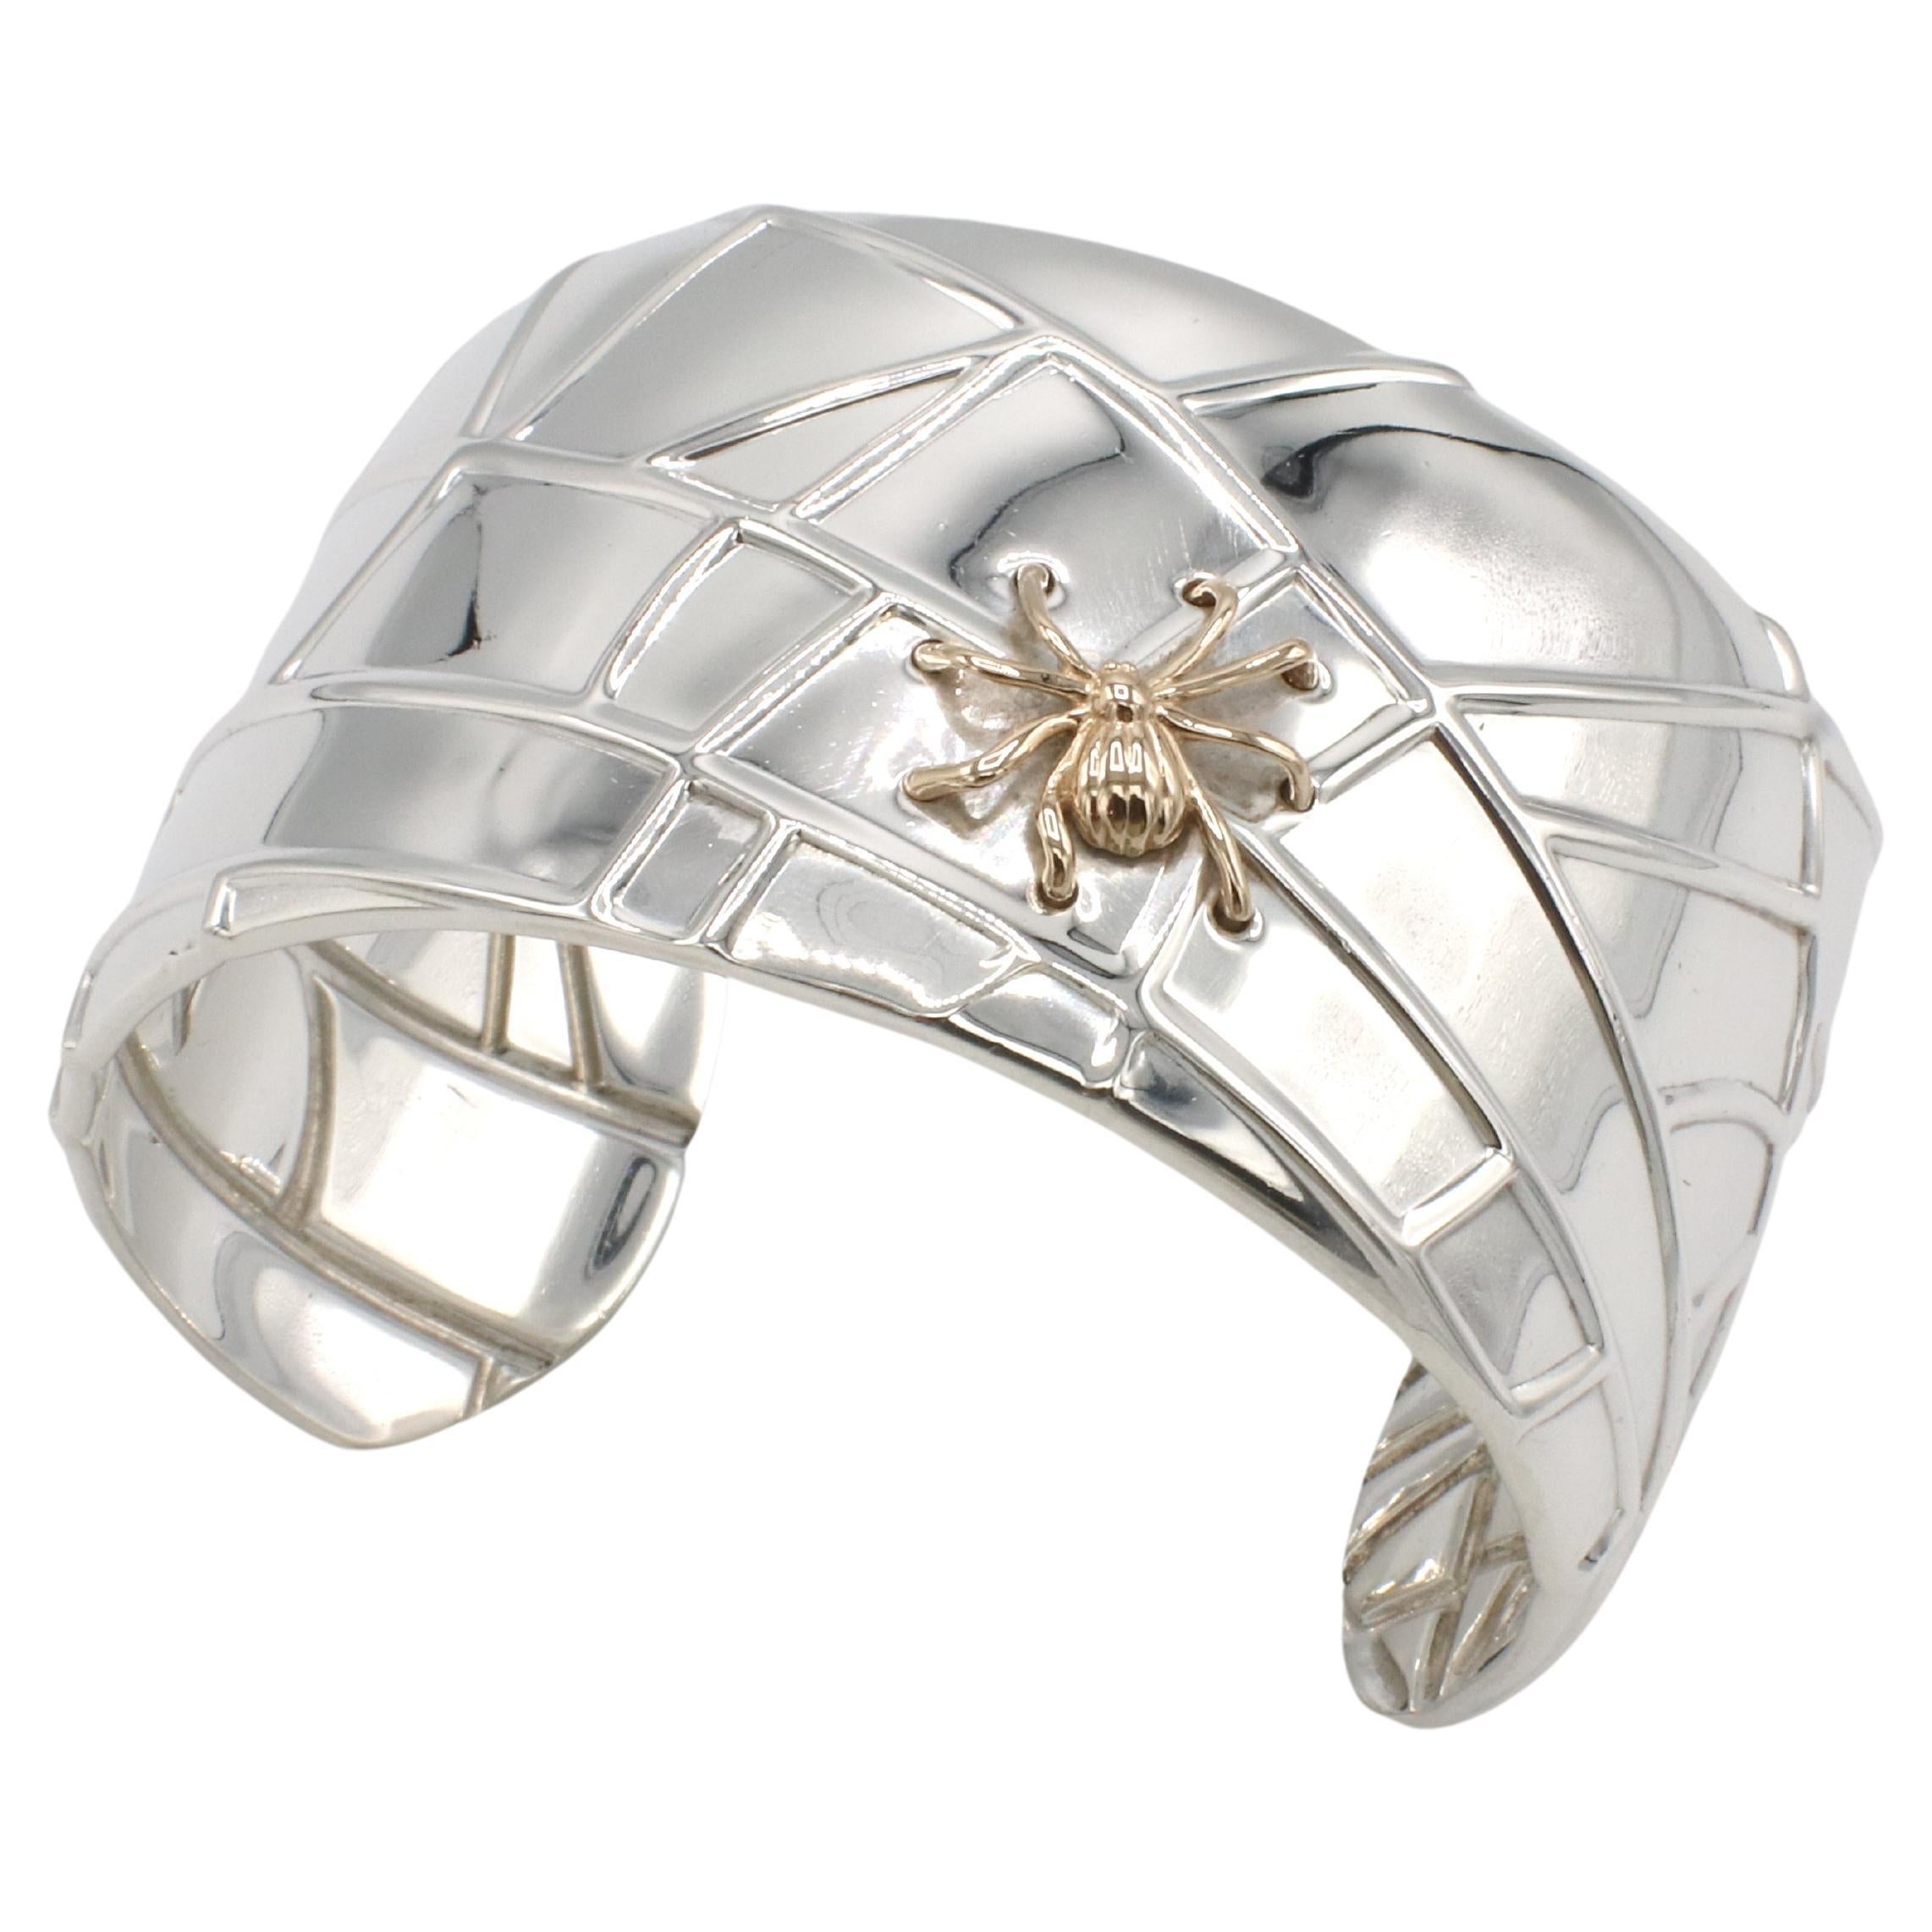 Tiffany & Co. Sterling Silver & Gold Spider Cuff Bracelet For Sale